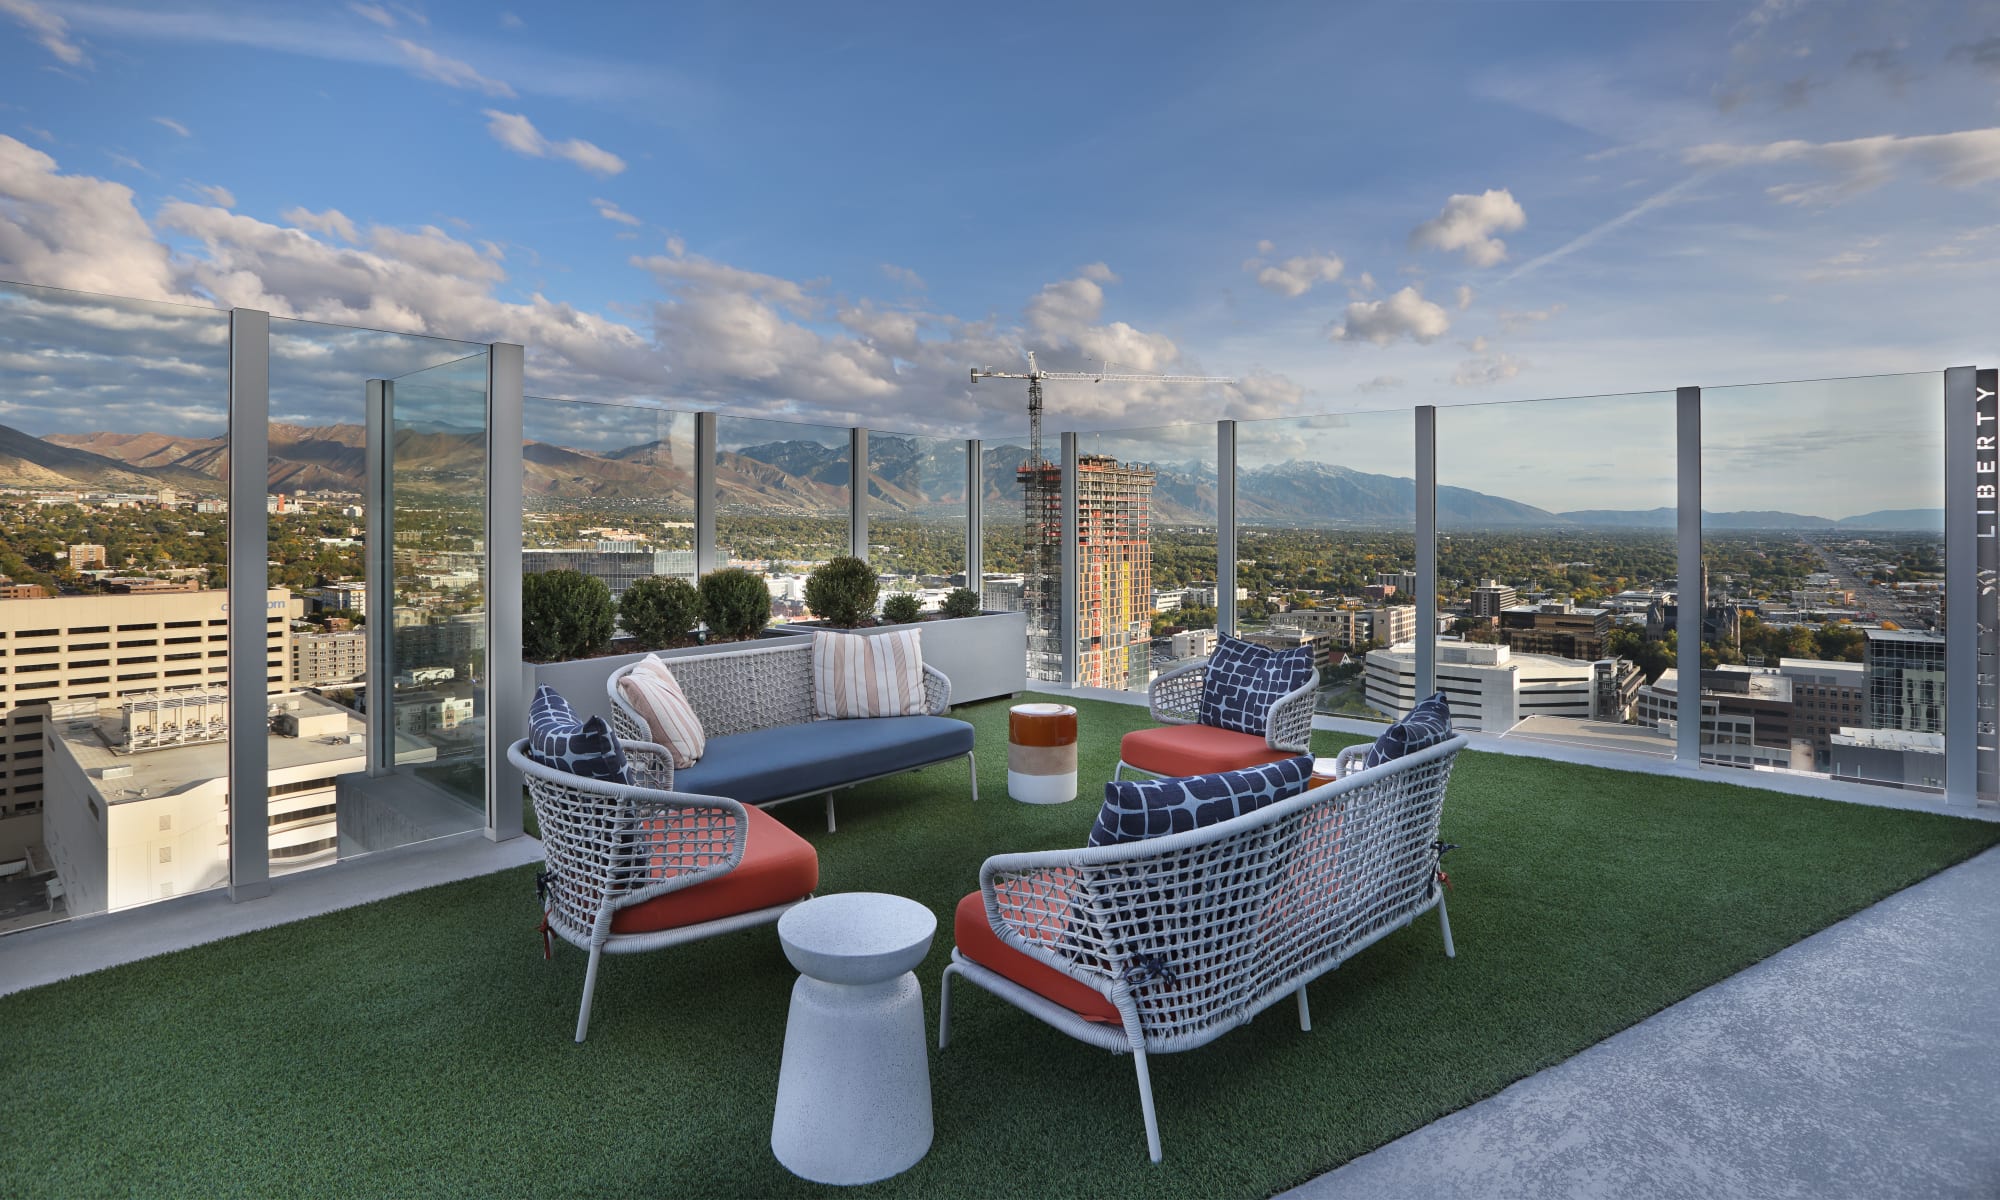 Liberty Sky, tower of luxury apartments, is opening in Salt Lake City